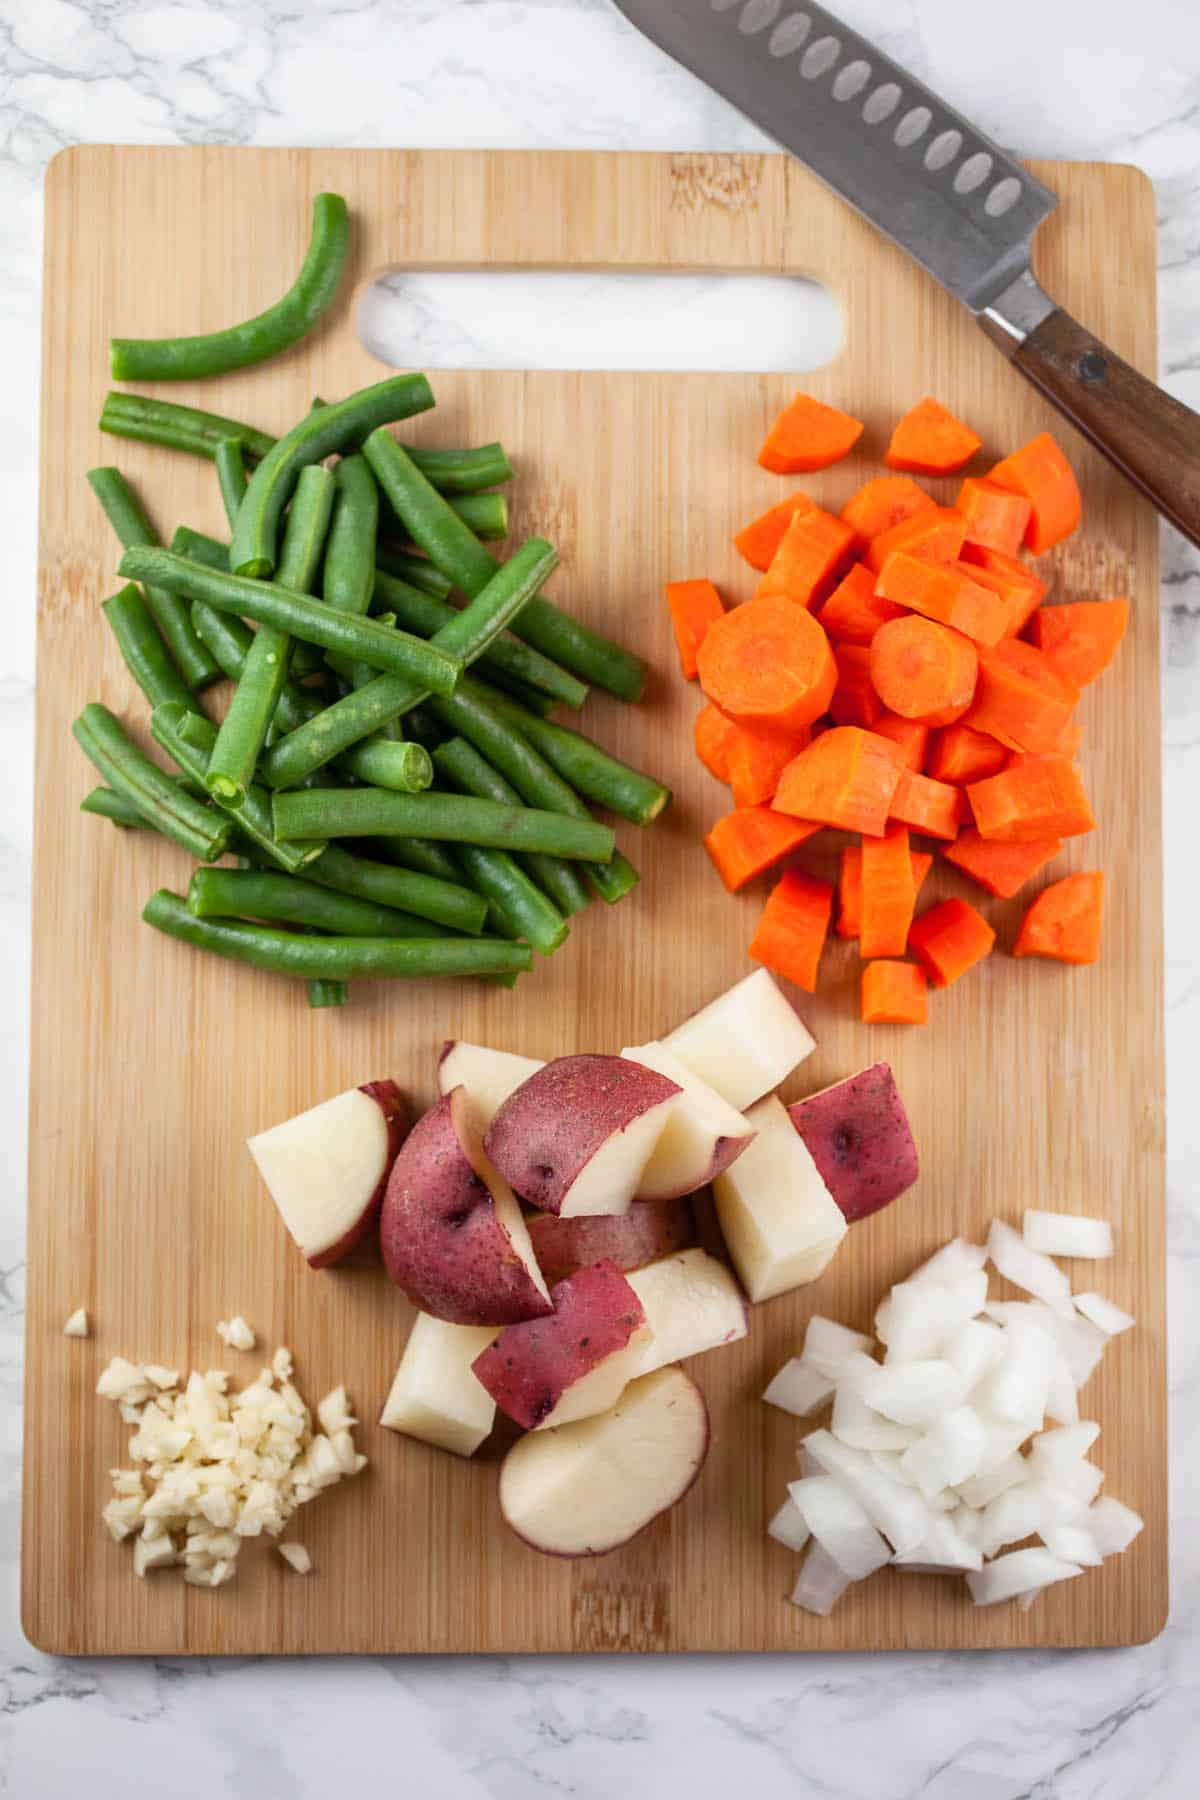 Minced garlic, onions, diced red potatoes, green beans, and carrots on wooden cutting board with knife.